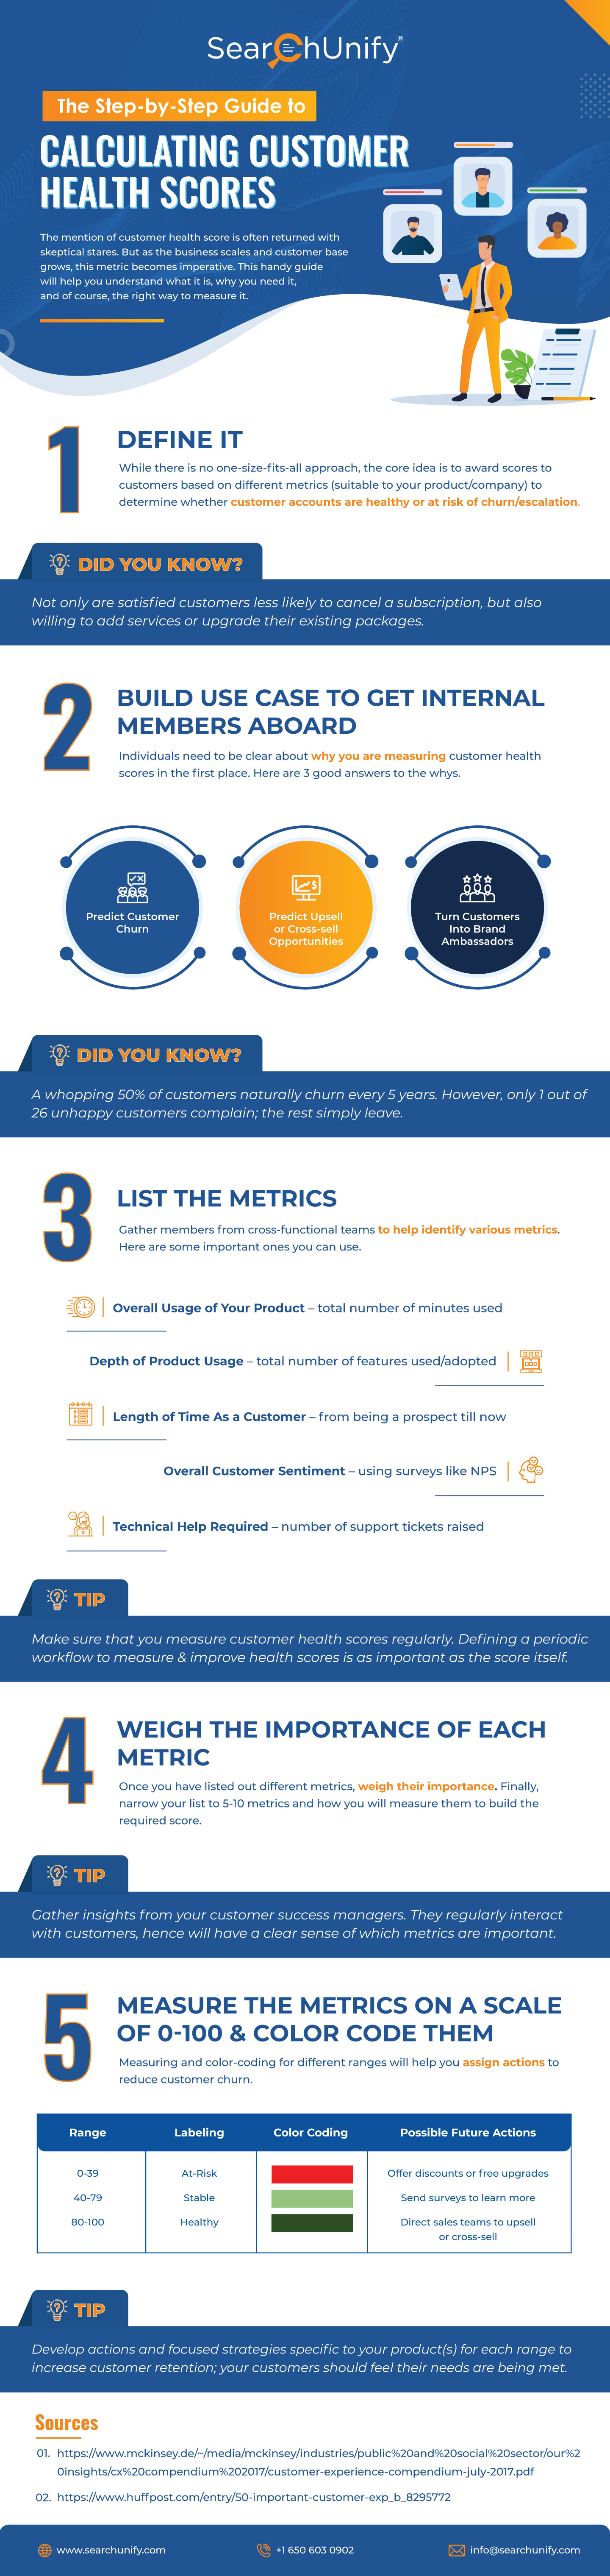 Support Leaders’ Cheat Sheet to the Top Customer Service KPIs